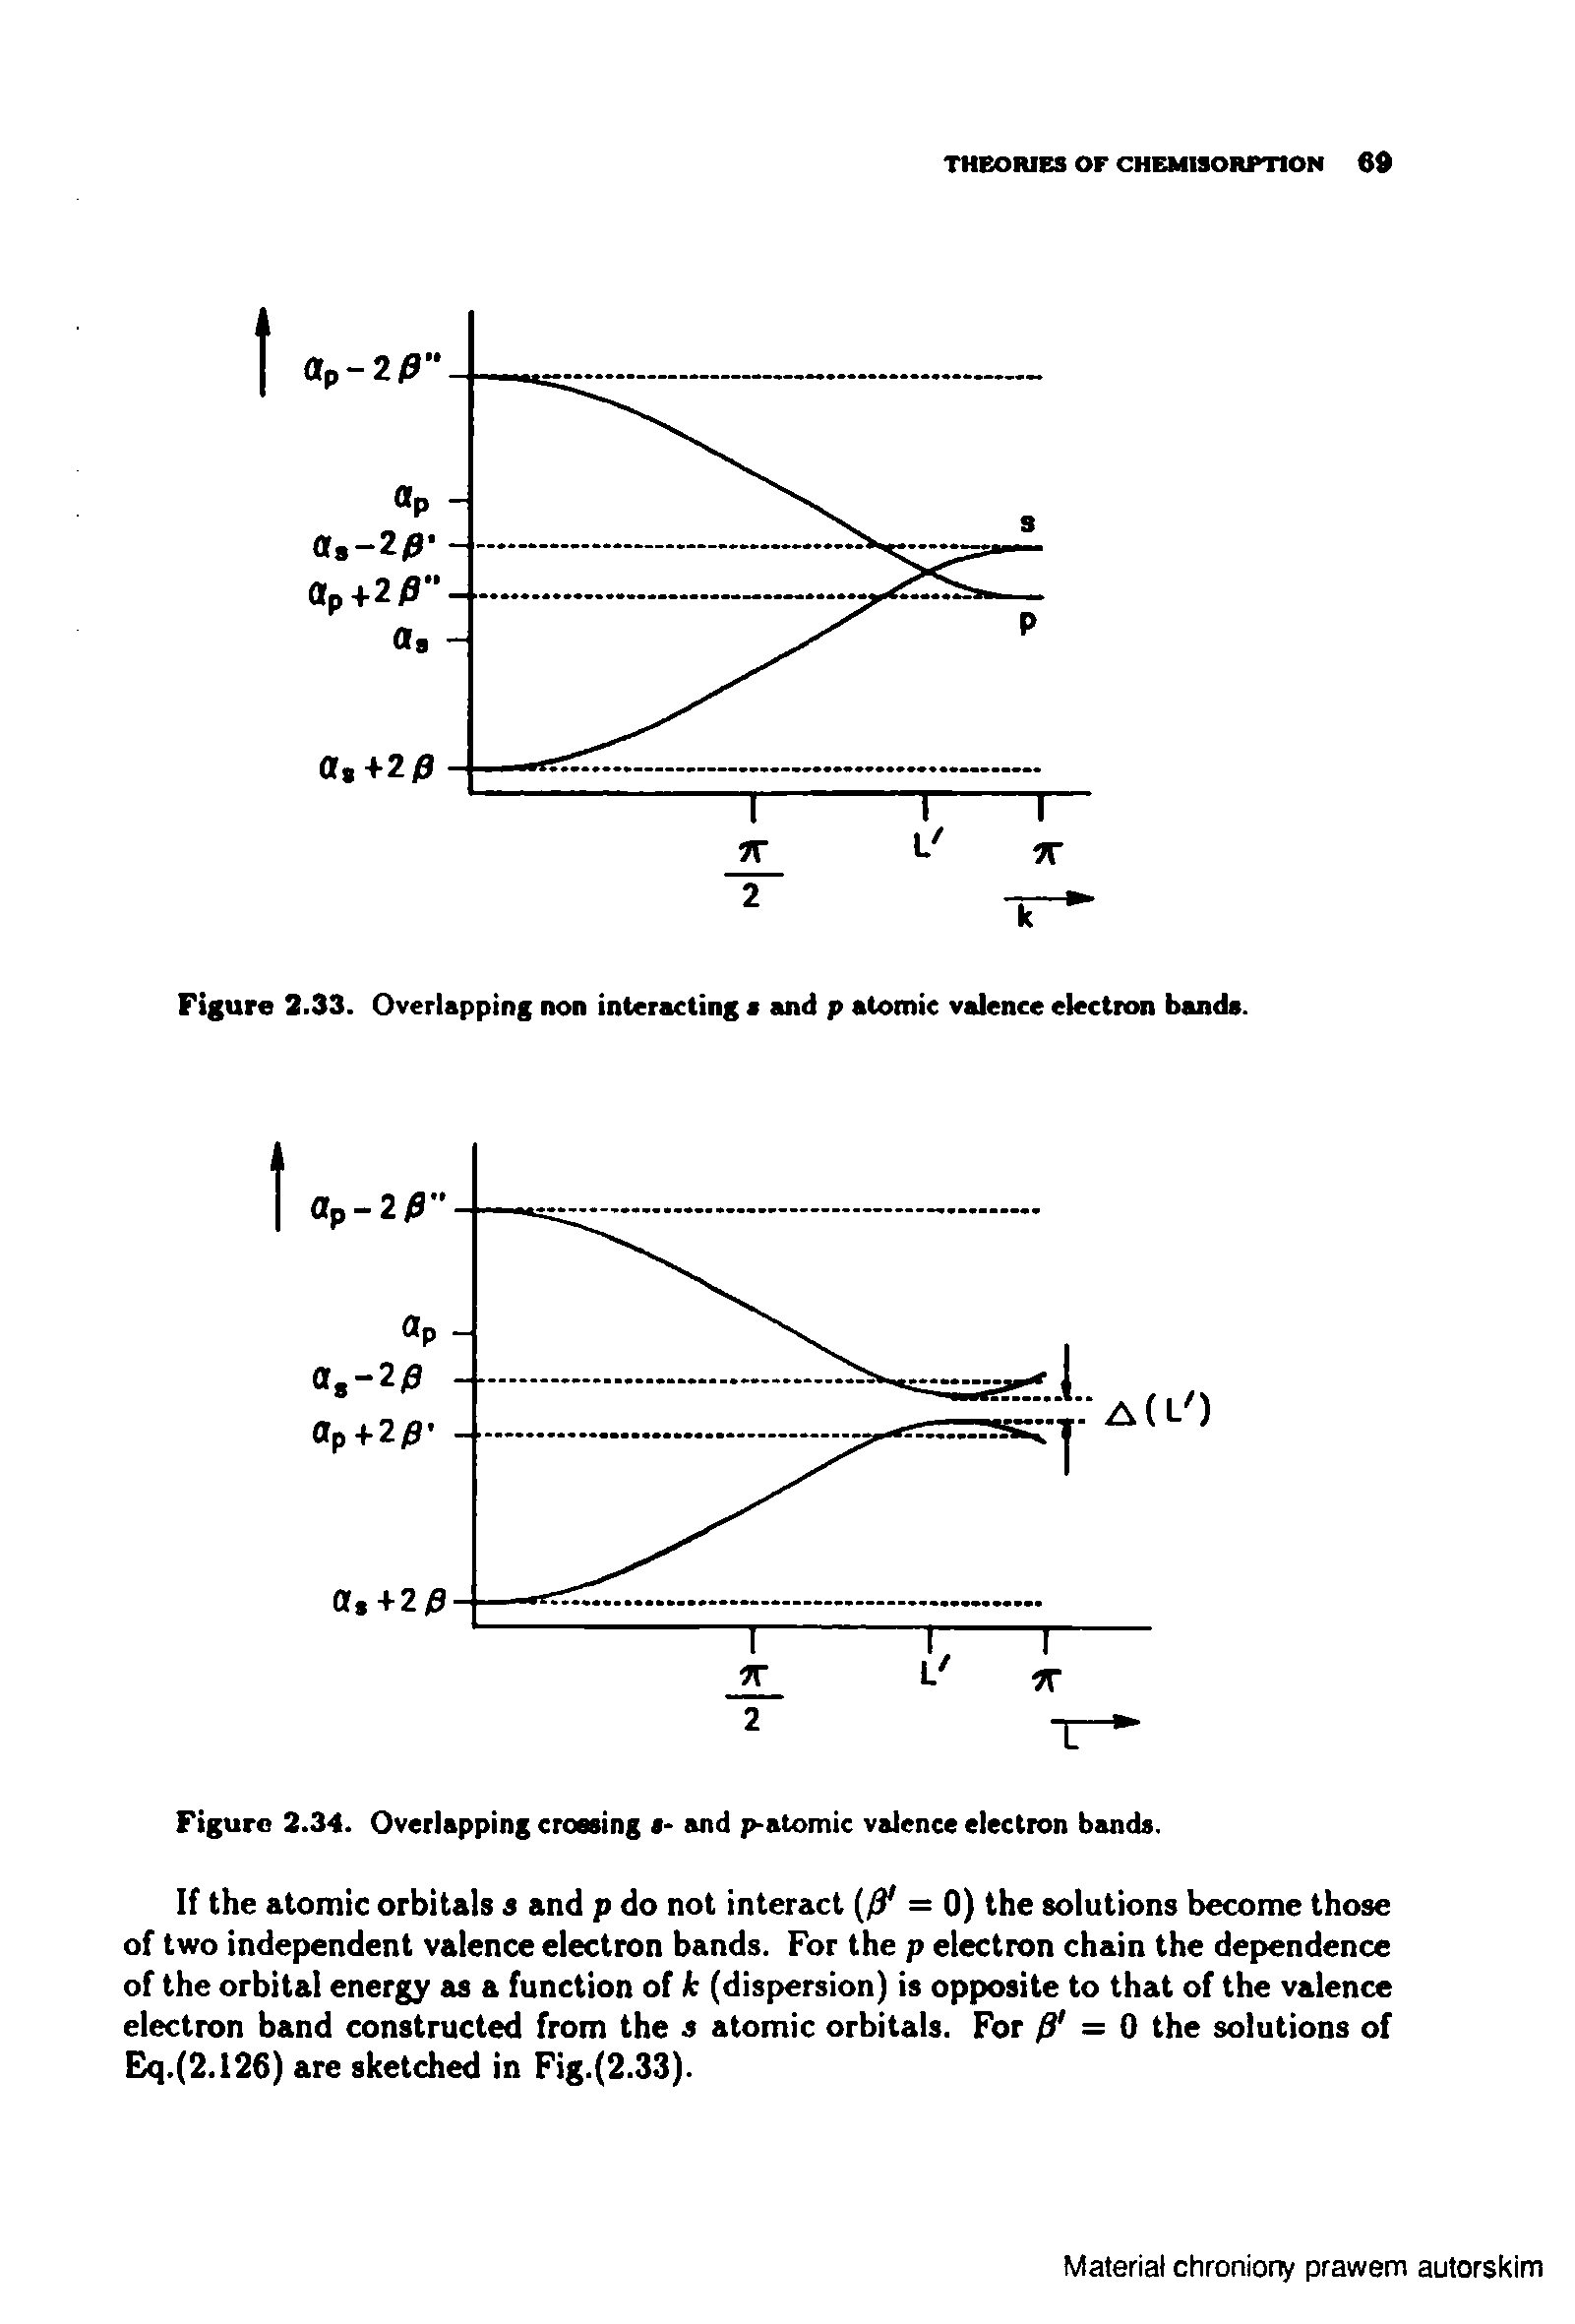 Figure 2.33. Overlapping non interacting a and p atomic valence electron bands.